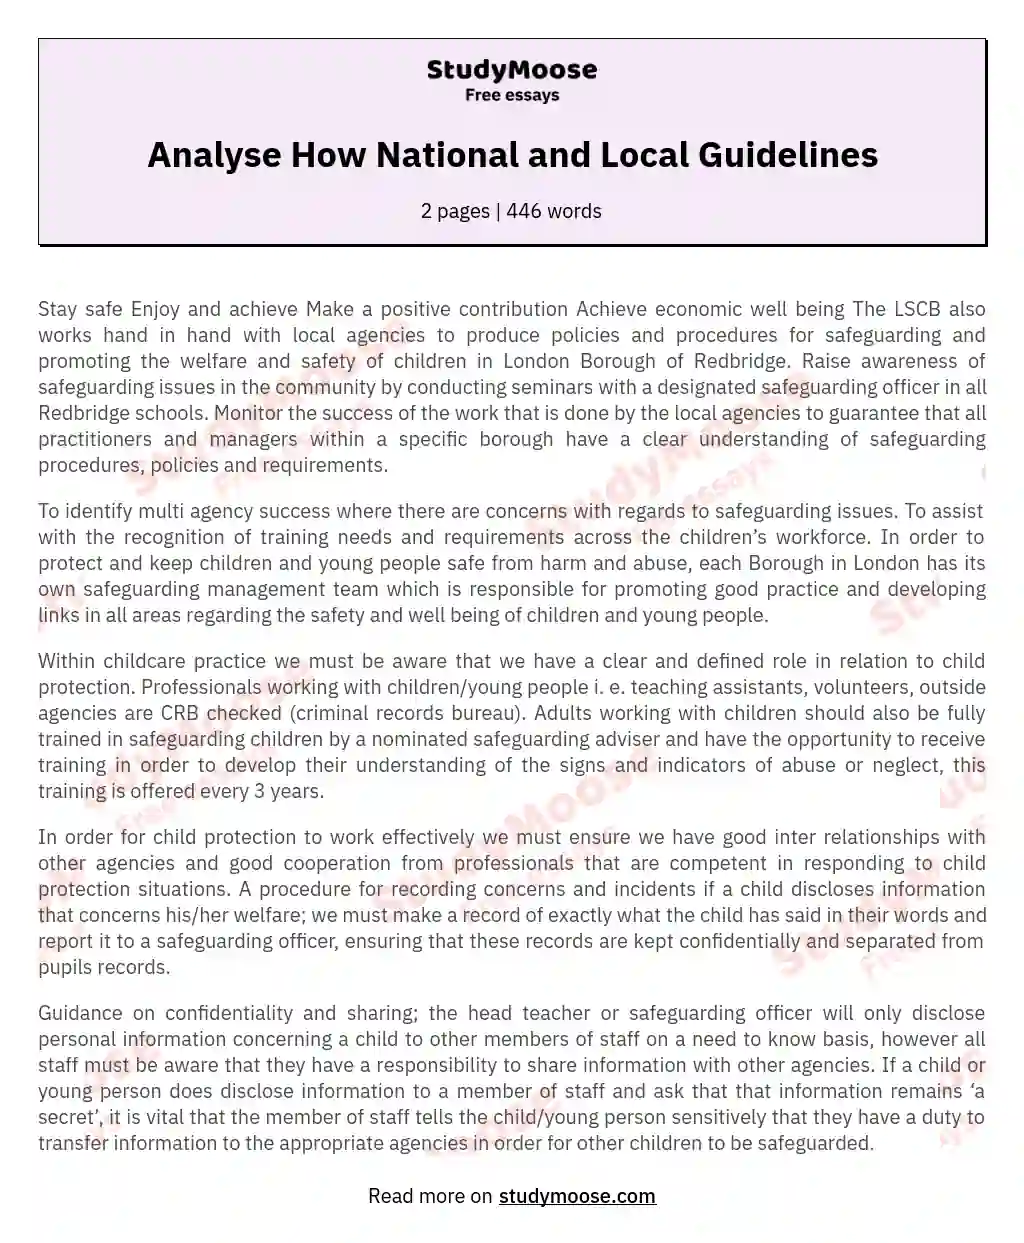 Analyse How National and Local Guidelines essay